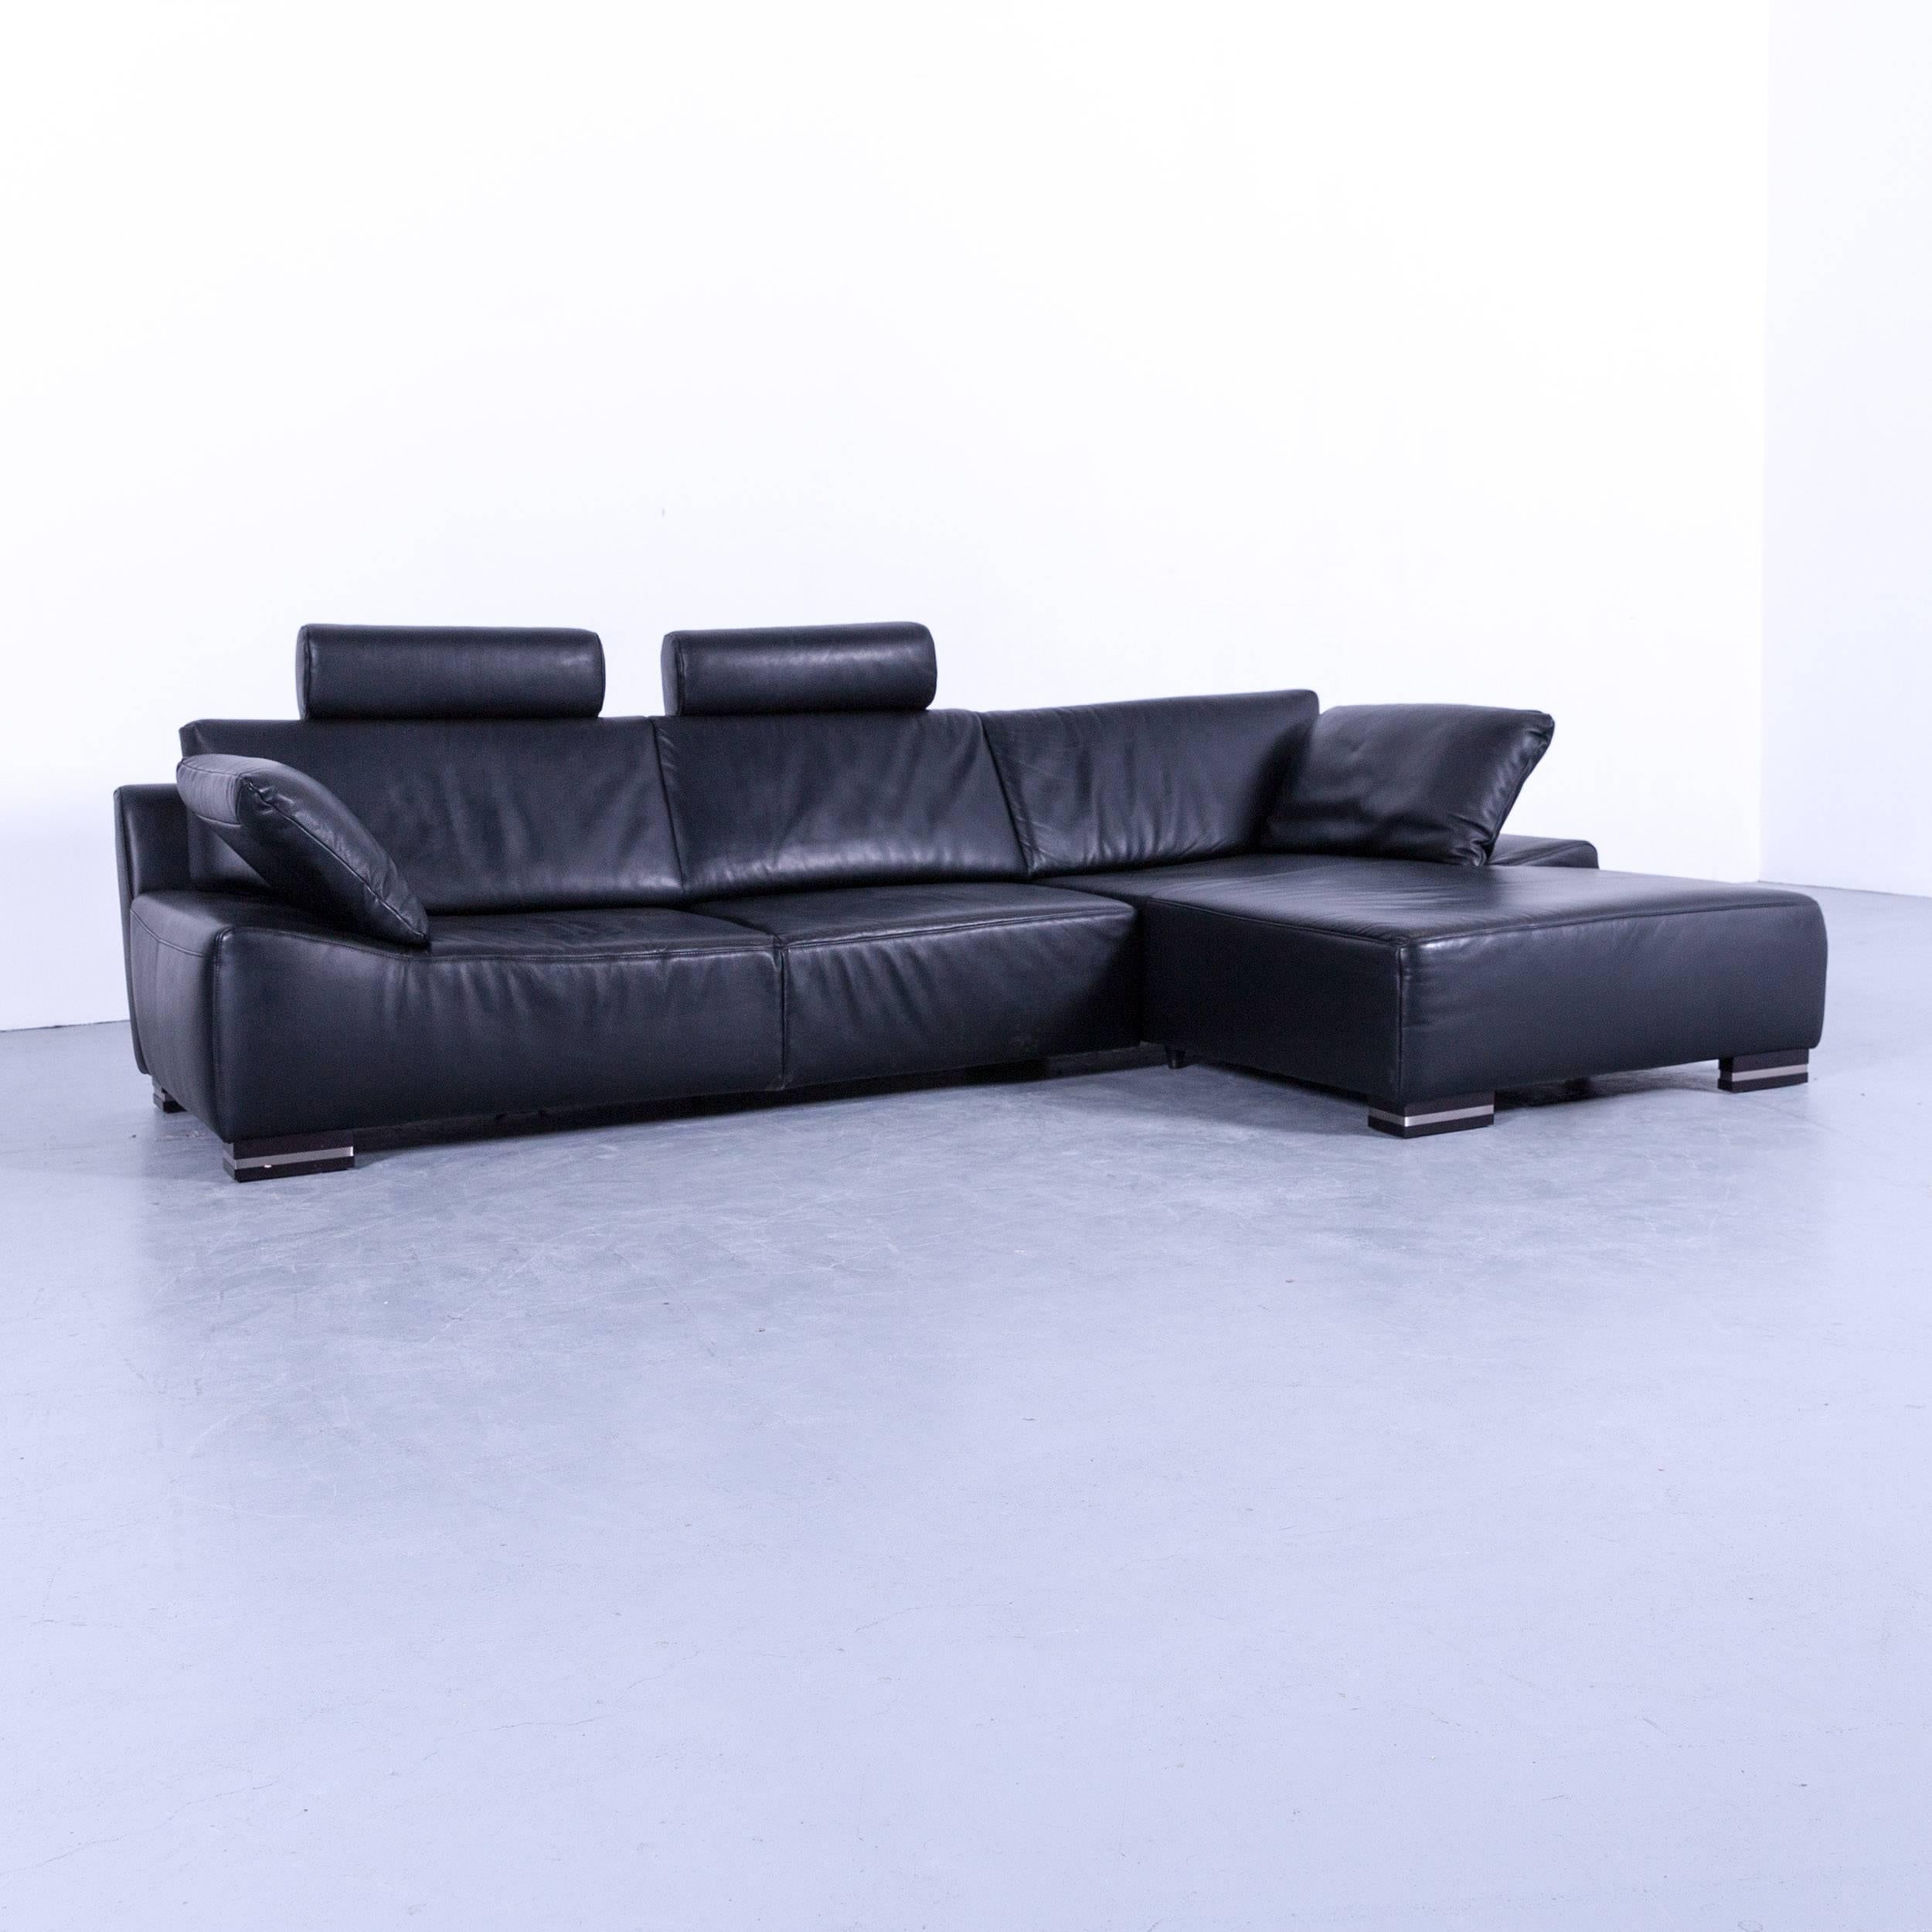 Black colored original Ewald Schillig Bentley designer corner couch, in a minimalistic and modern design, with funktion made for pure comfort.